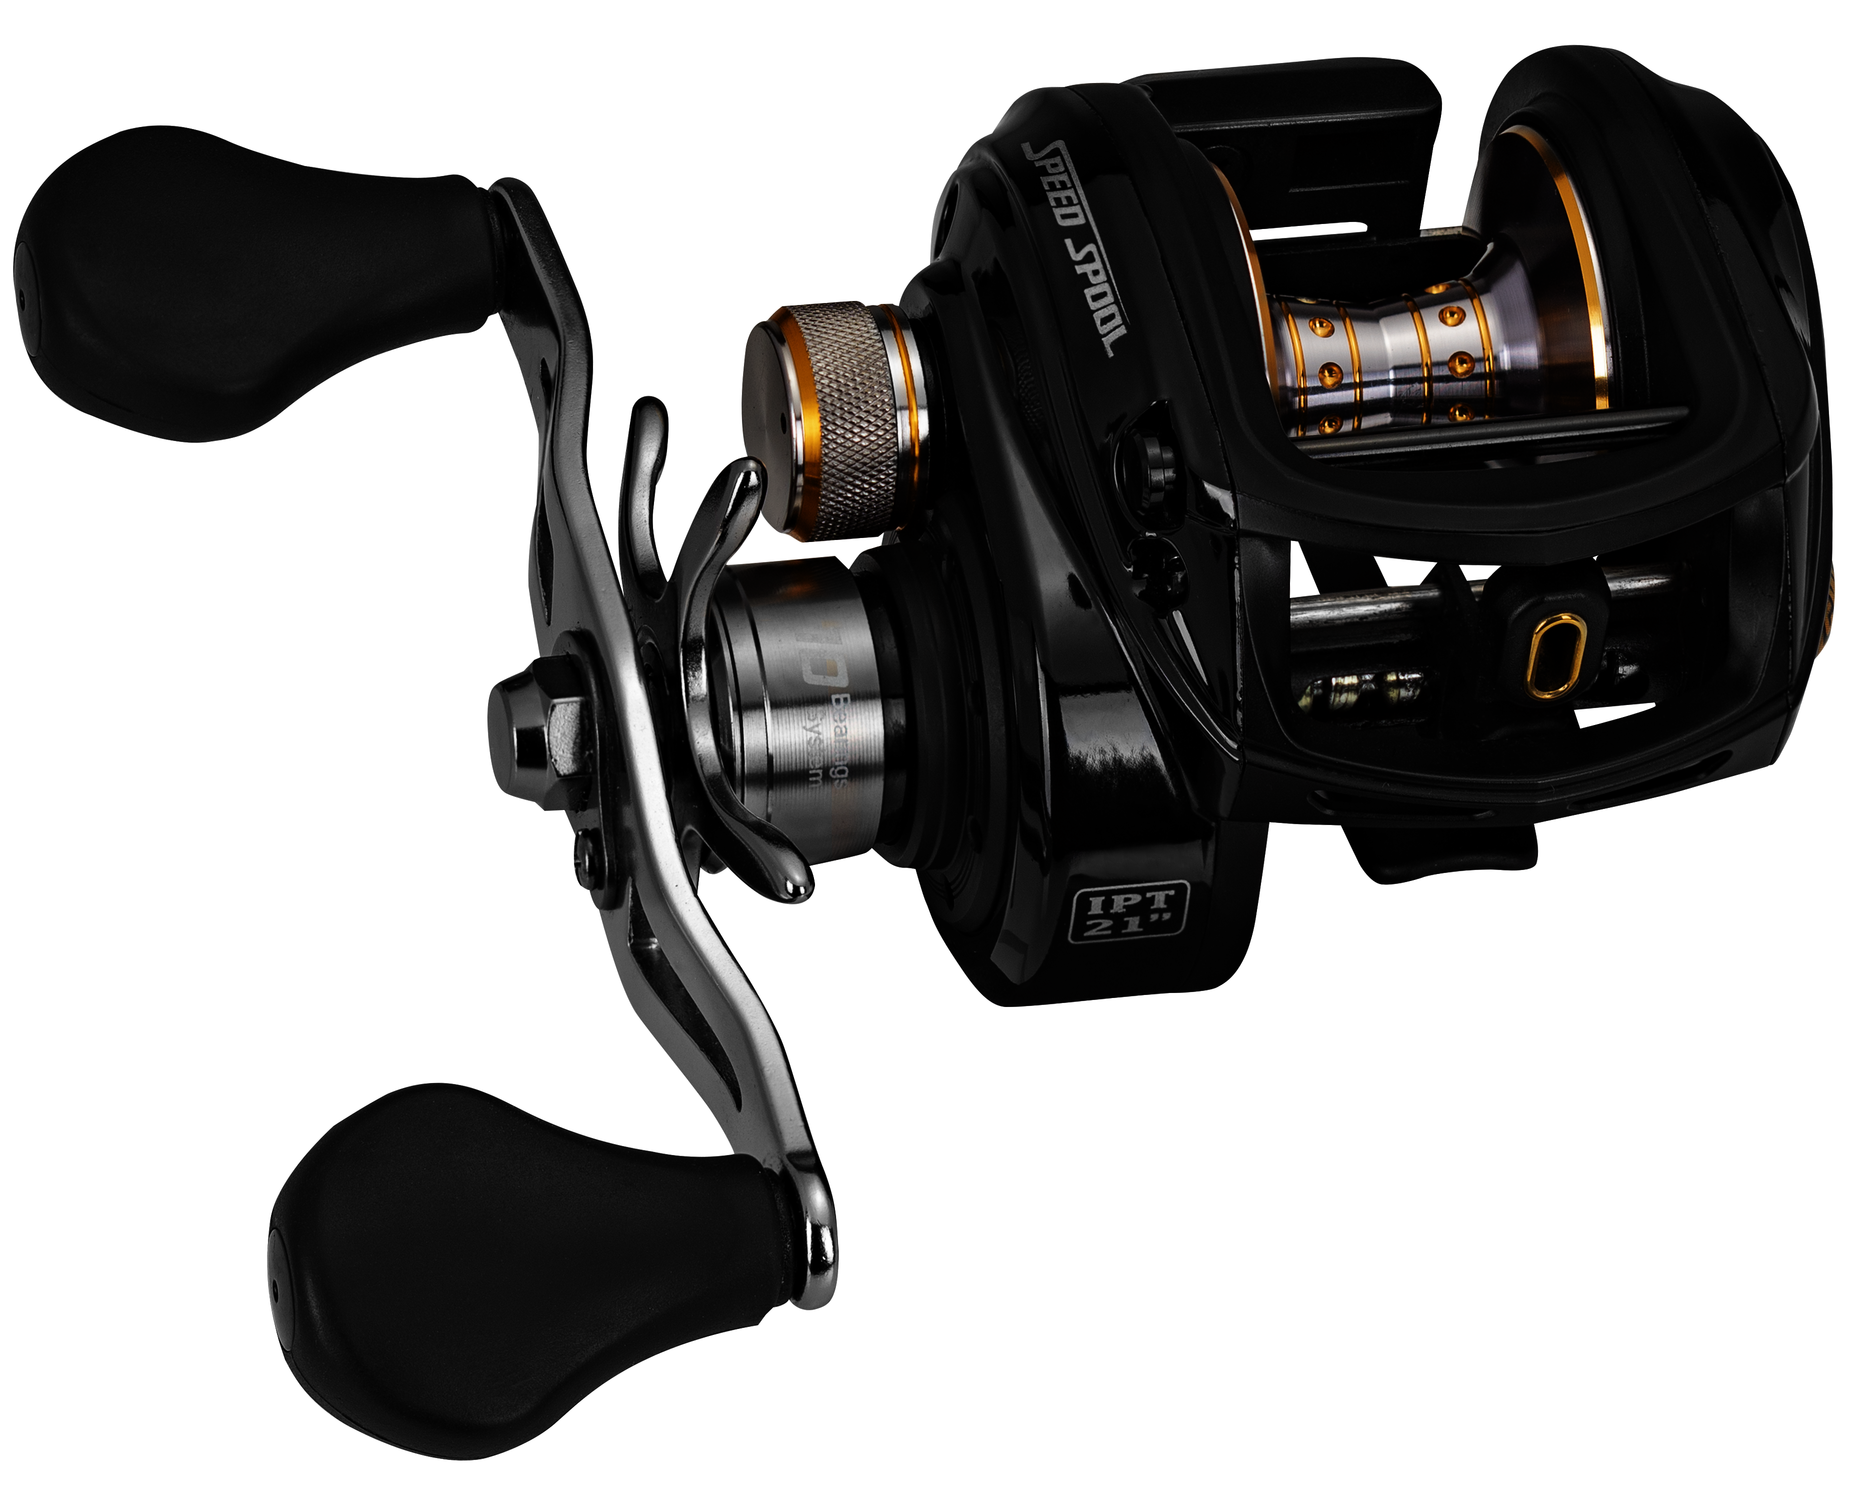 The Lew's BB1 Pro Baitcast Reel is Built for Hours on the Water